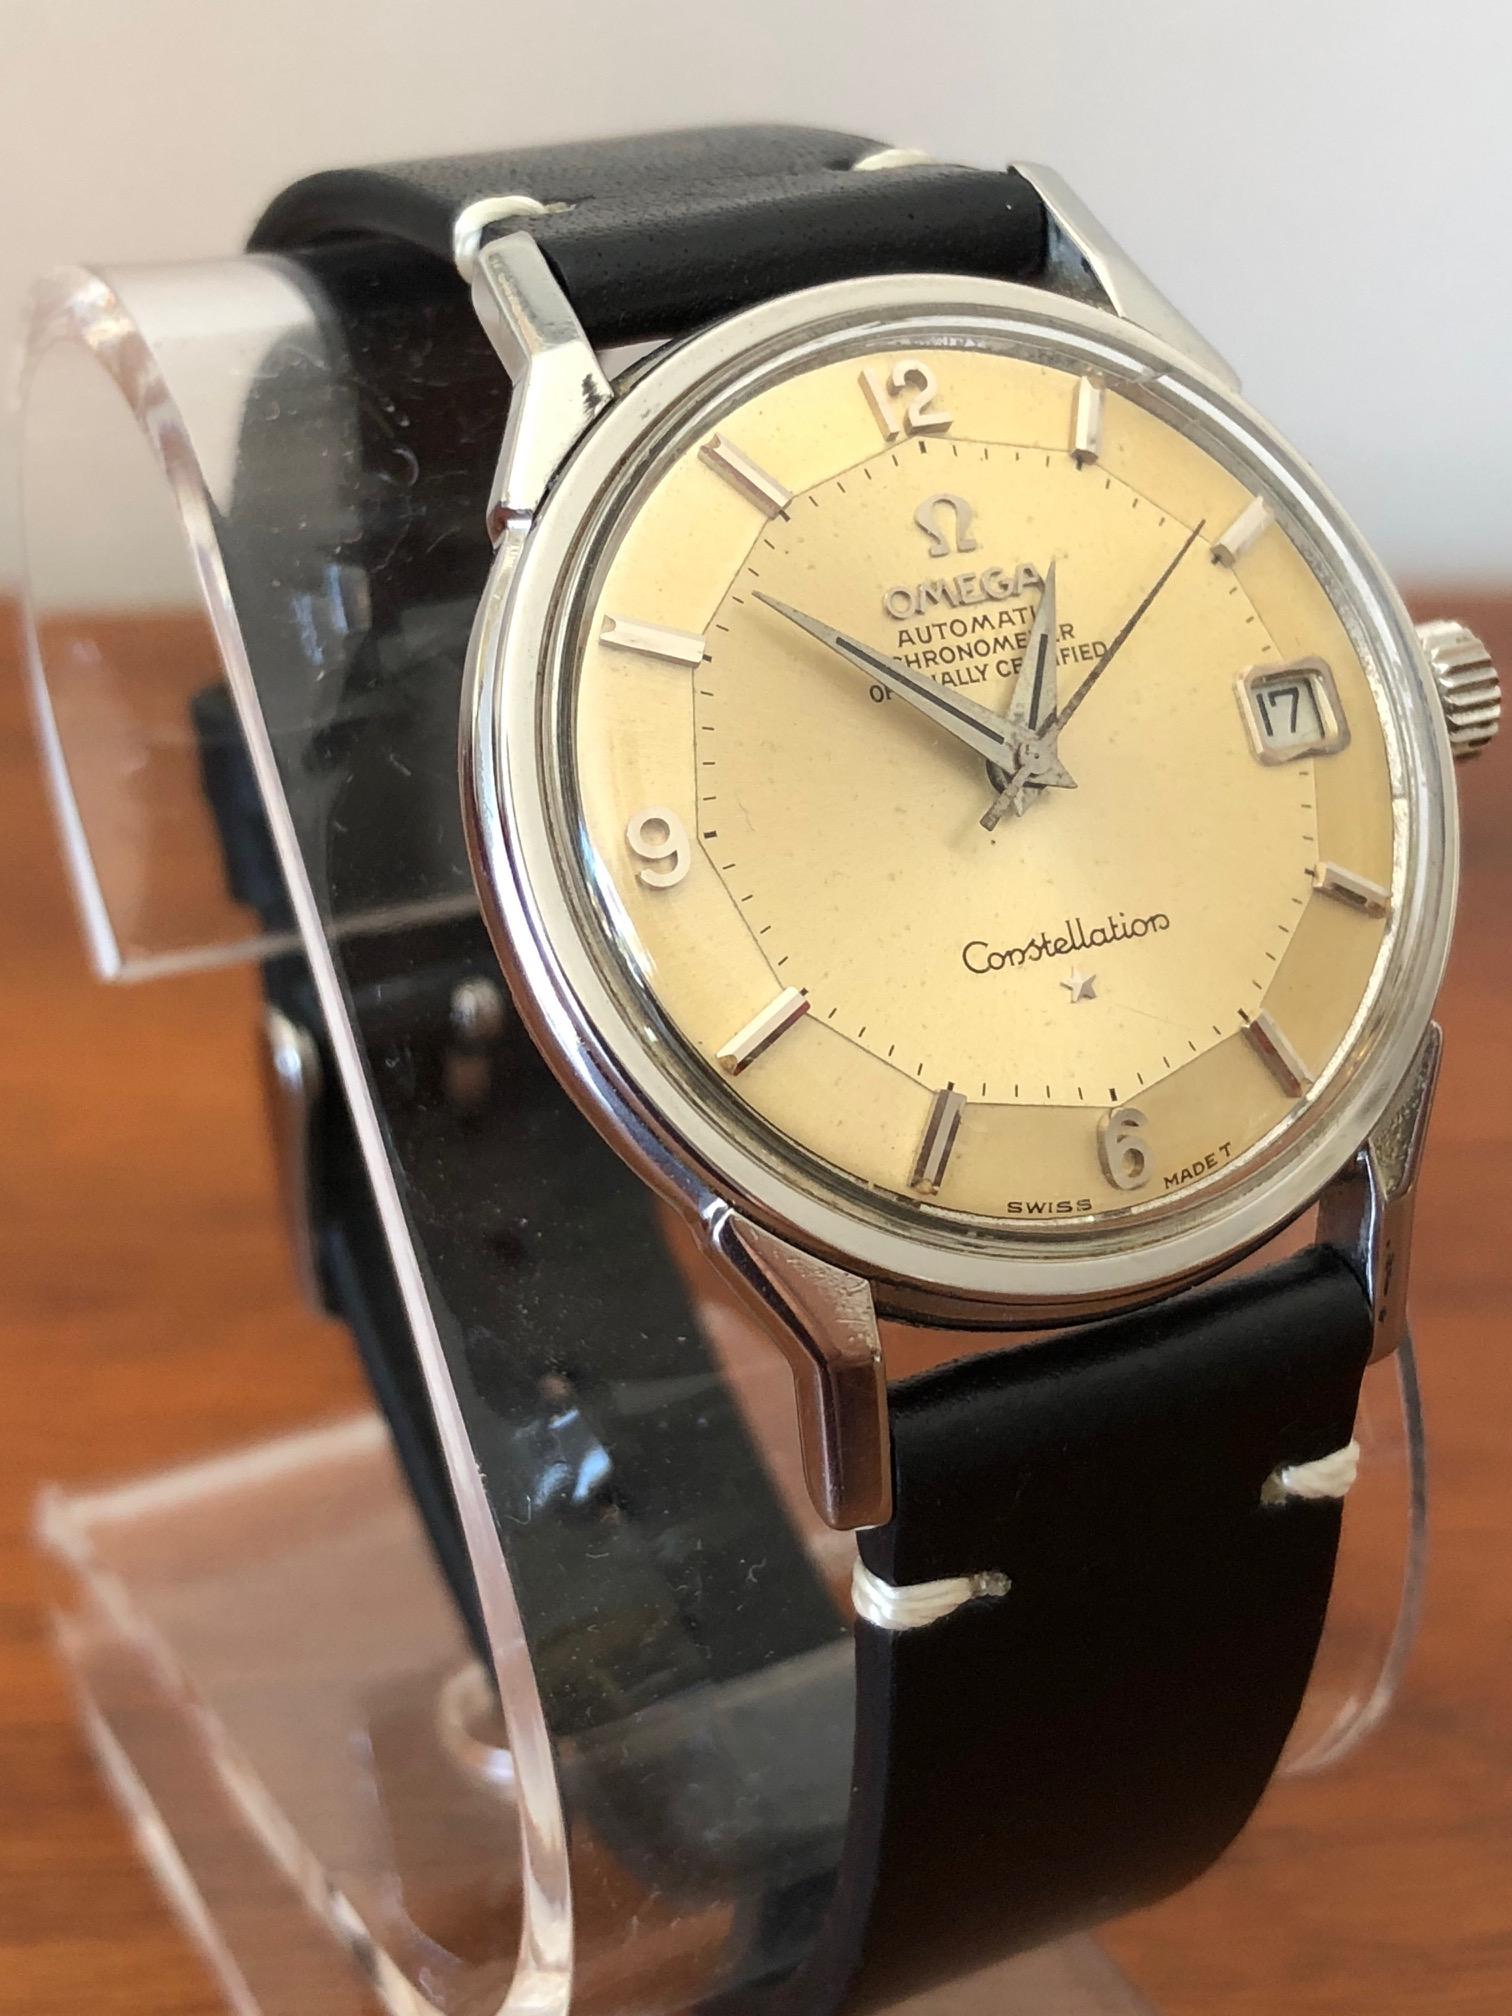 Rare Omega Constellation Stainless Steel Ref. 168.005, 23 million serial number, circa 1966. Calibre 561 movement. Case measuring 34mm. Pie pan dial with seconds sweep and date. Very good condition-original, unrestored dial with warm creamy patina